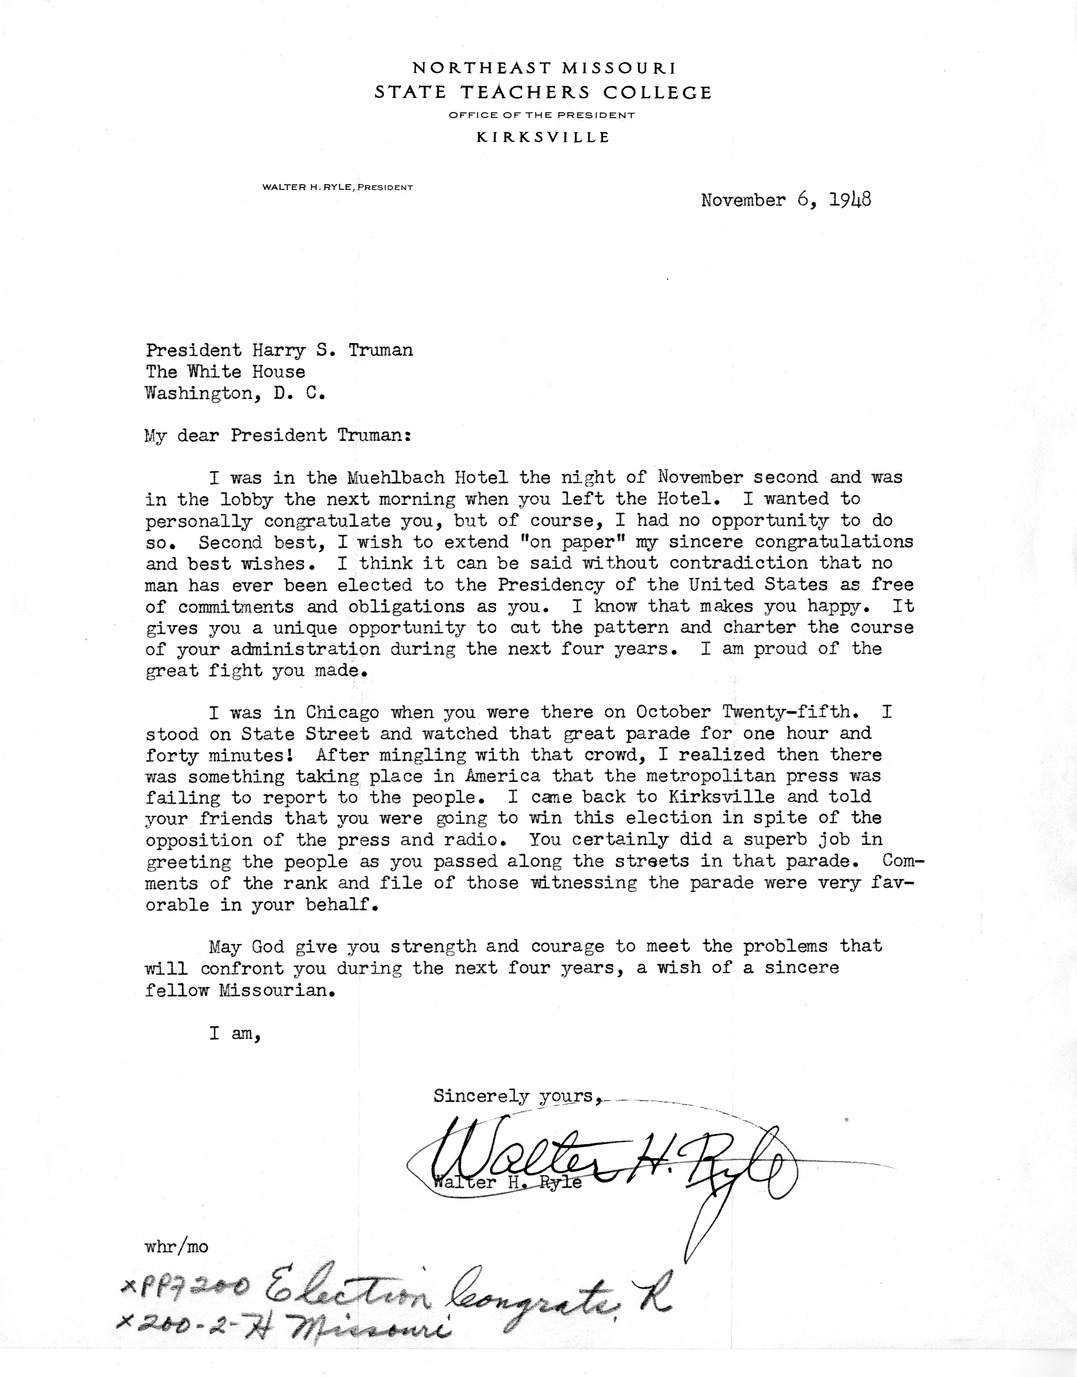 Correspondence Between President Harry S. Truman and Walter H. Ryle